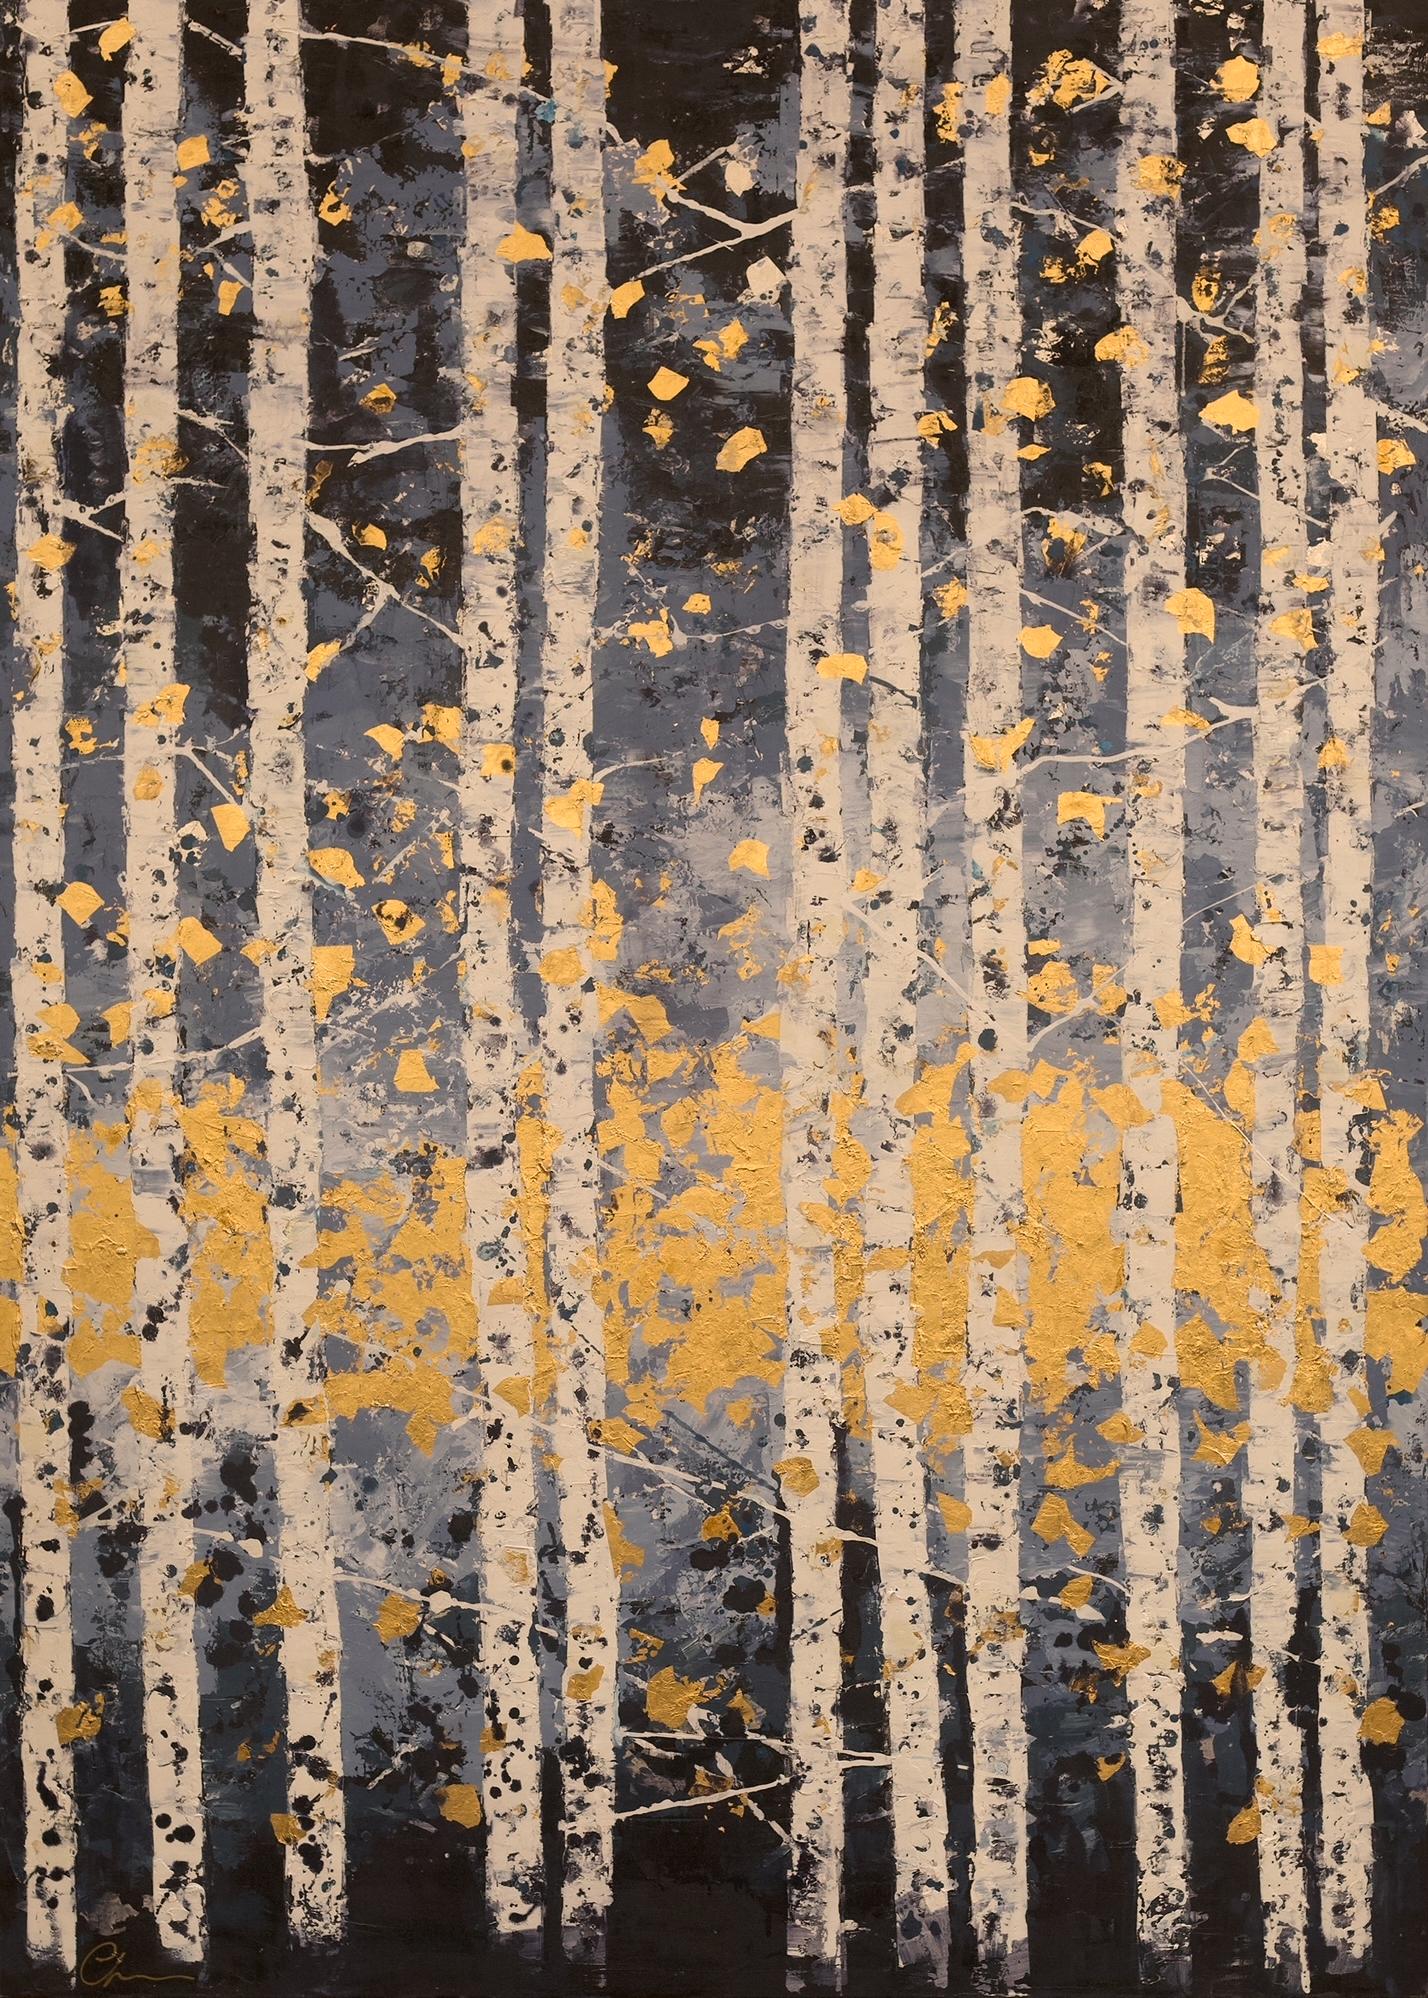 Medianoche en el Bosque - 21st Century, Oil painting, abstract, fall, gold leaf